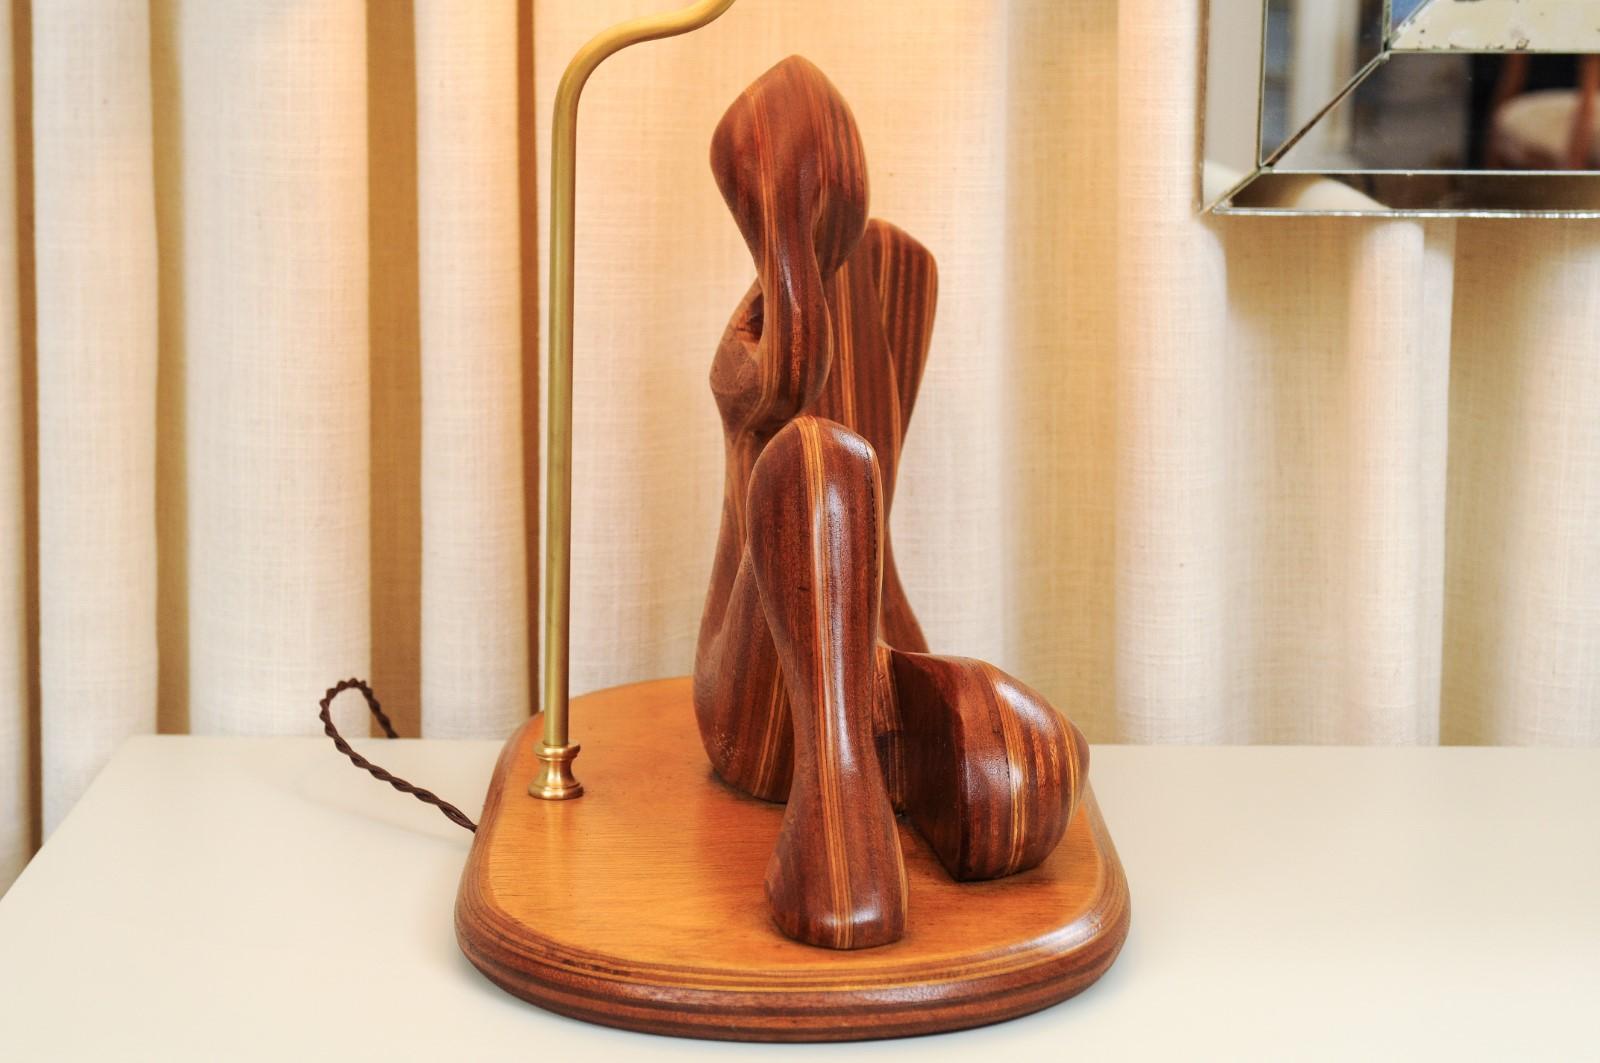  Breathtaking Pair of Birch and Mahogany Sculptures as Lamps, circa 1985 For Sale 11